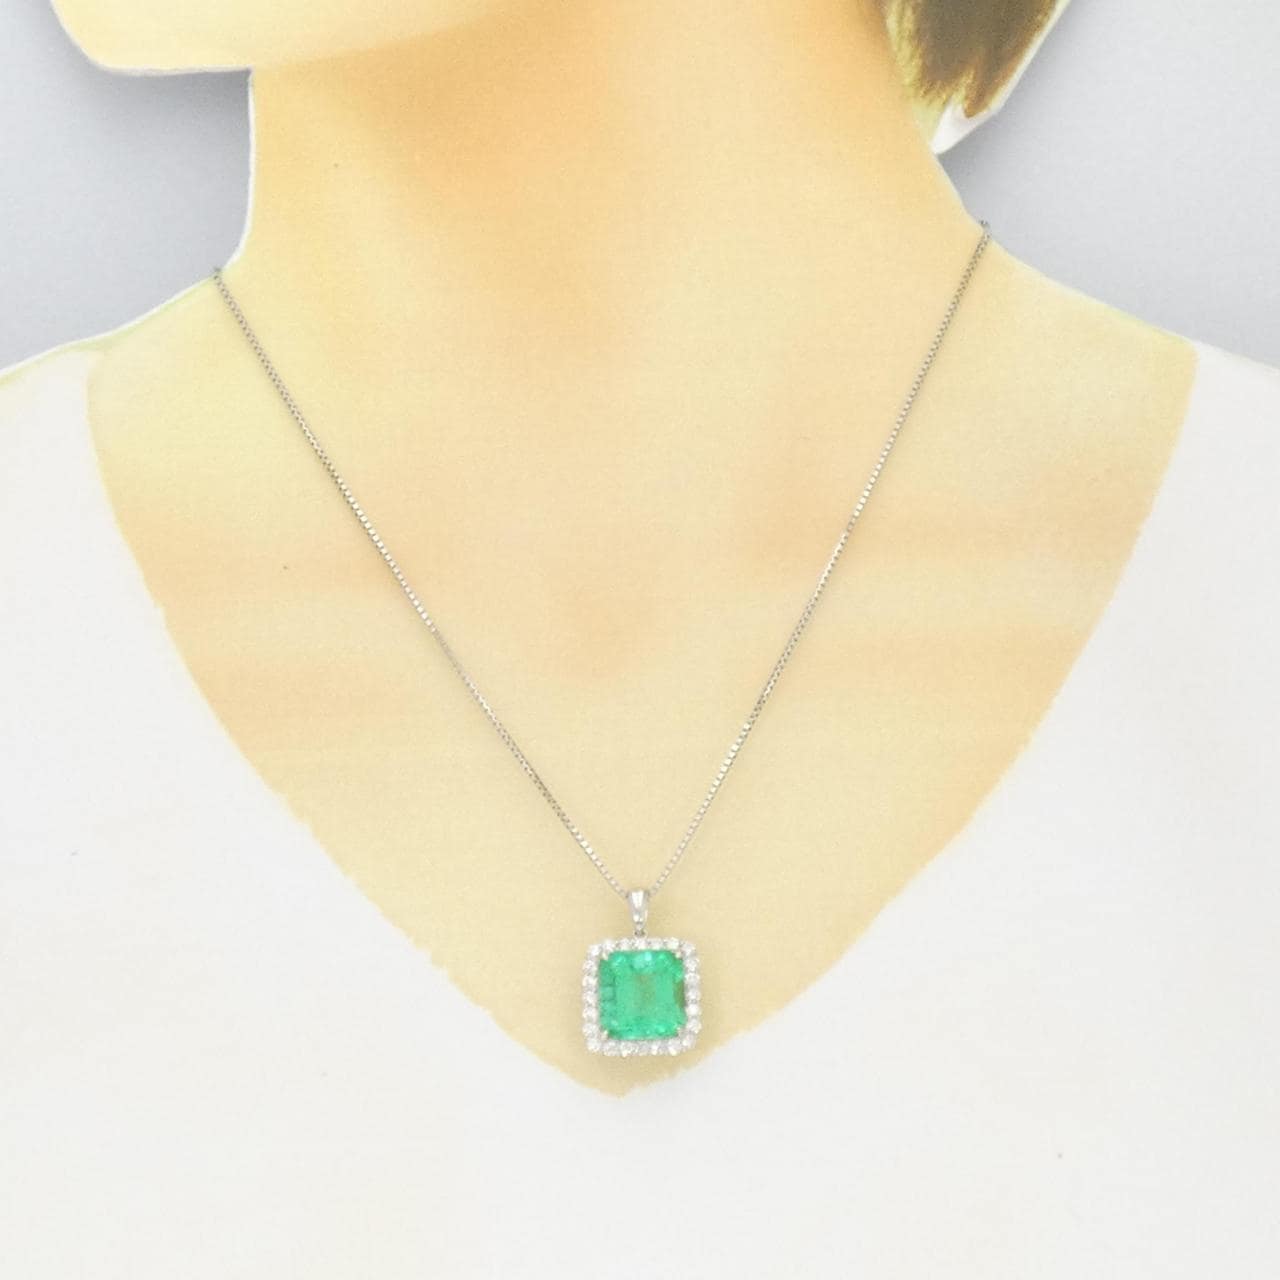 [Remake] PT Emerald Necklace 7.36CT Made in Colombia